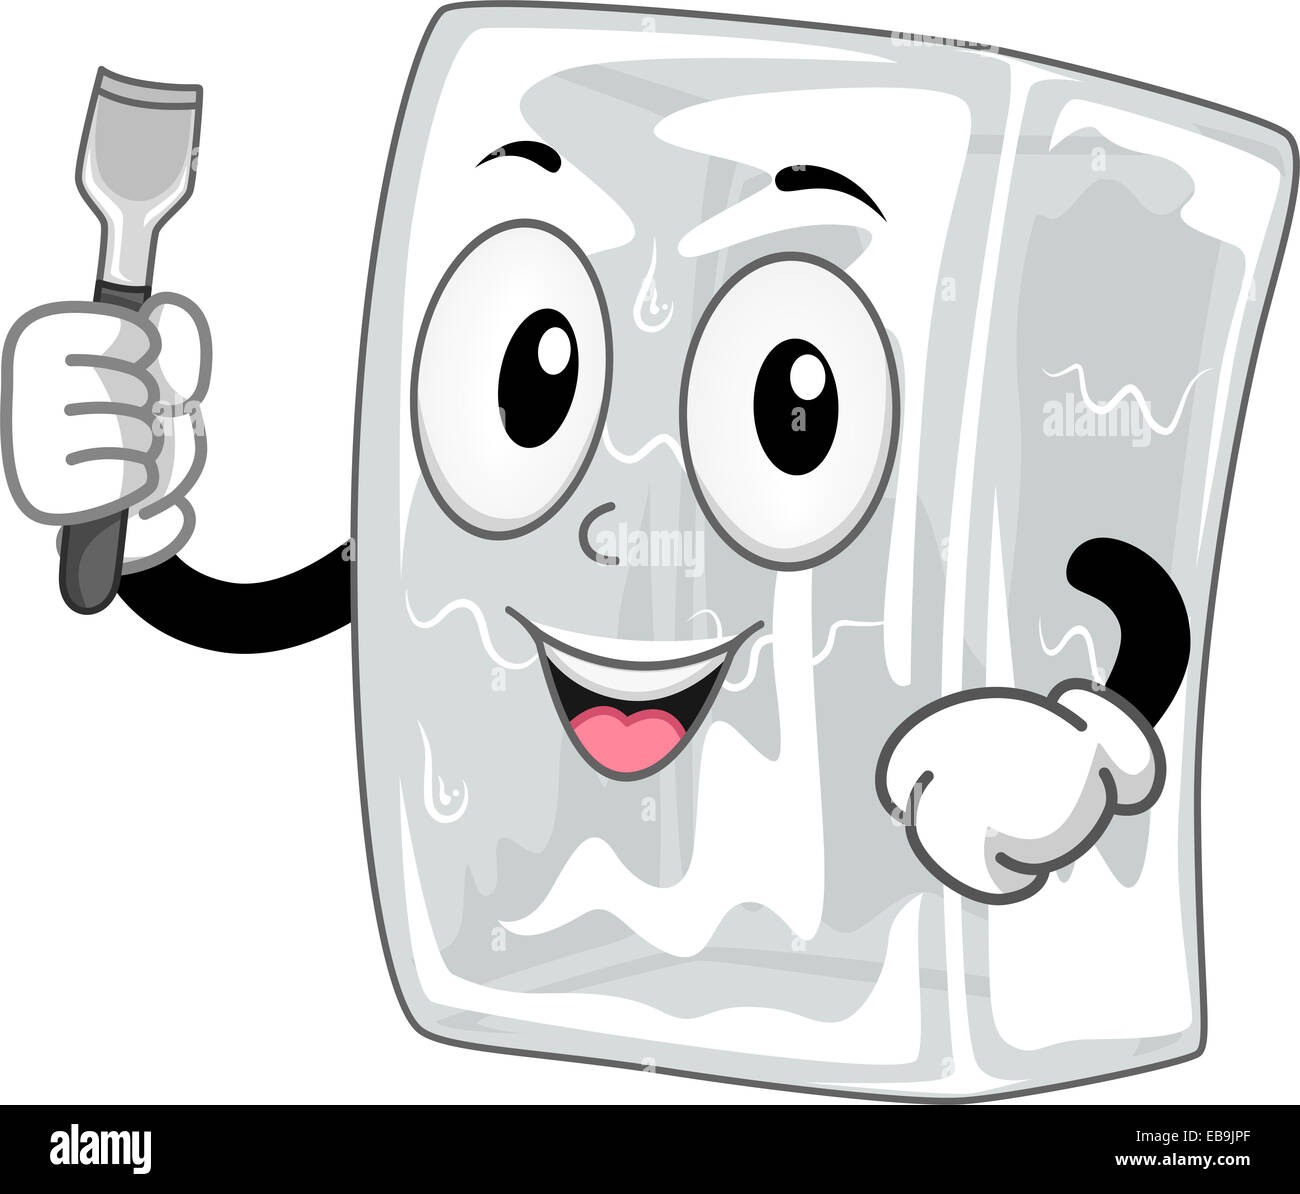 Mascot Illustration Featuring a Block of Ice Holding an Ice Chisel Stock Photo